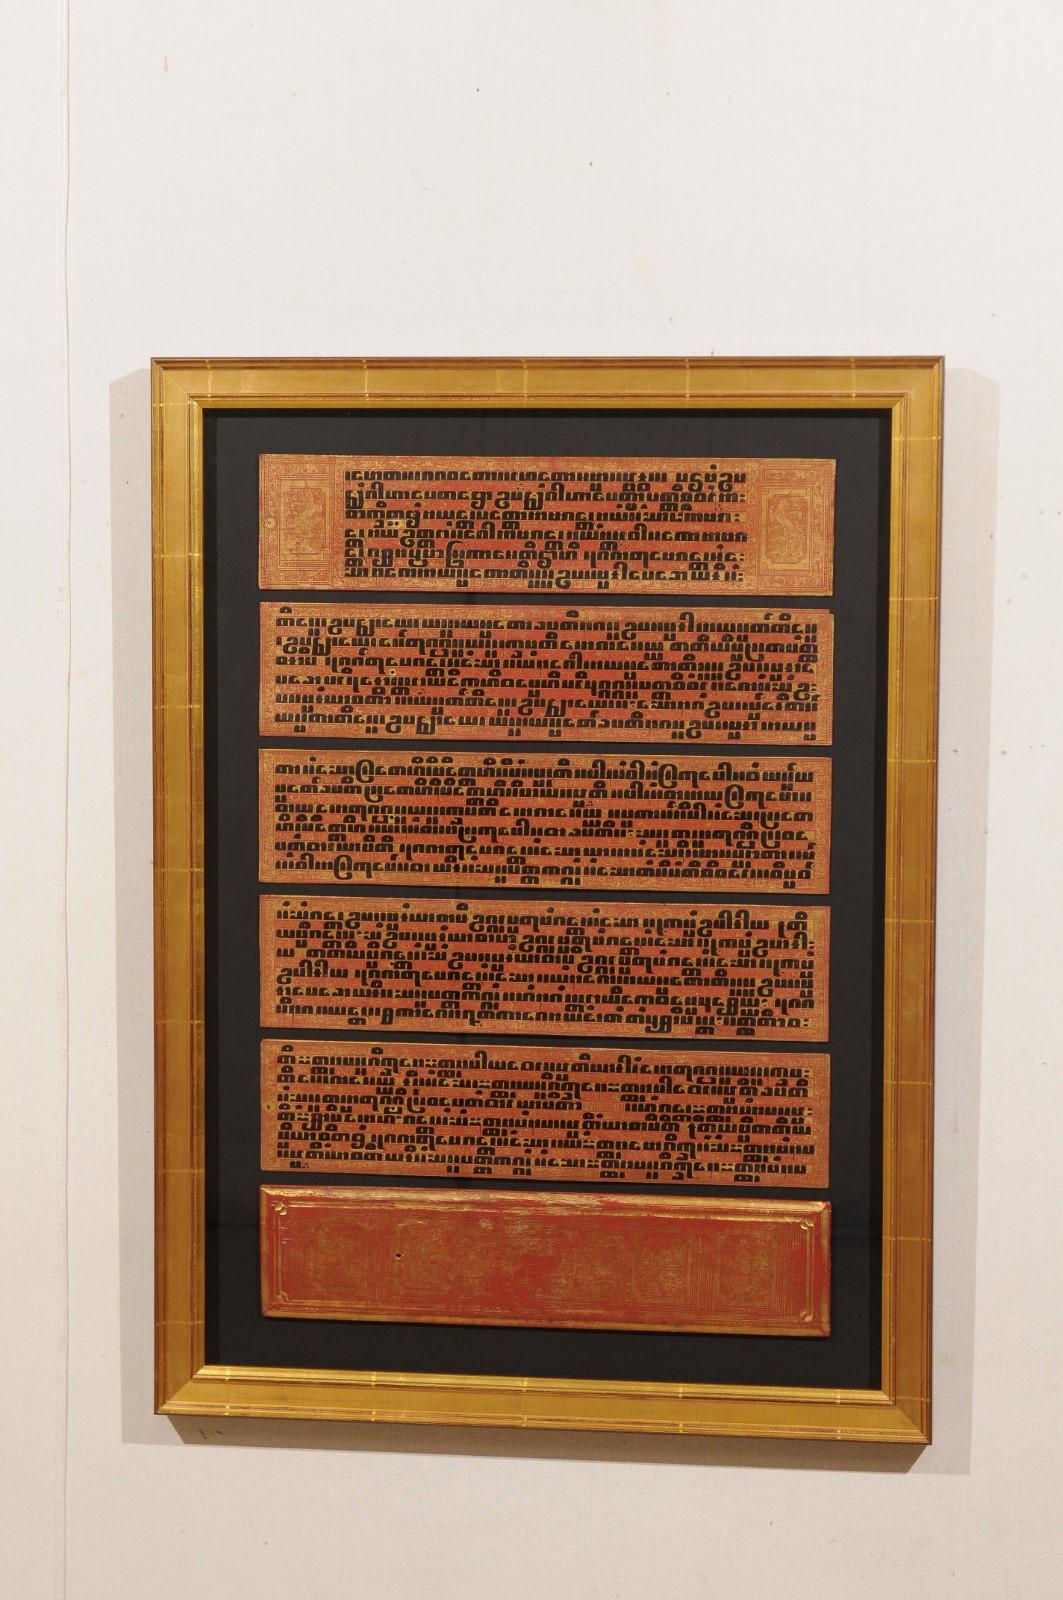 A fabulous collection of 19th century Buddhist manuscripts artistically displayed within custom frames. This collection of three framed wall art hangings each contain a section of a 19th century manuscripts written in Kammavaca, a sacred religious